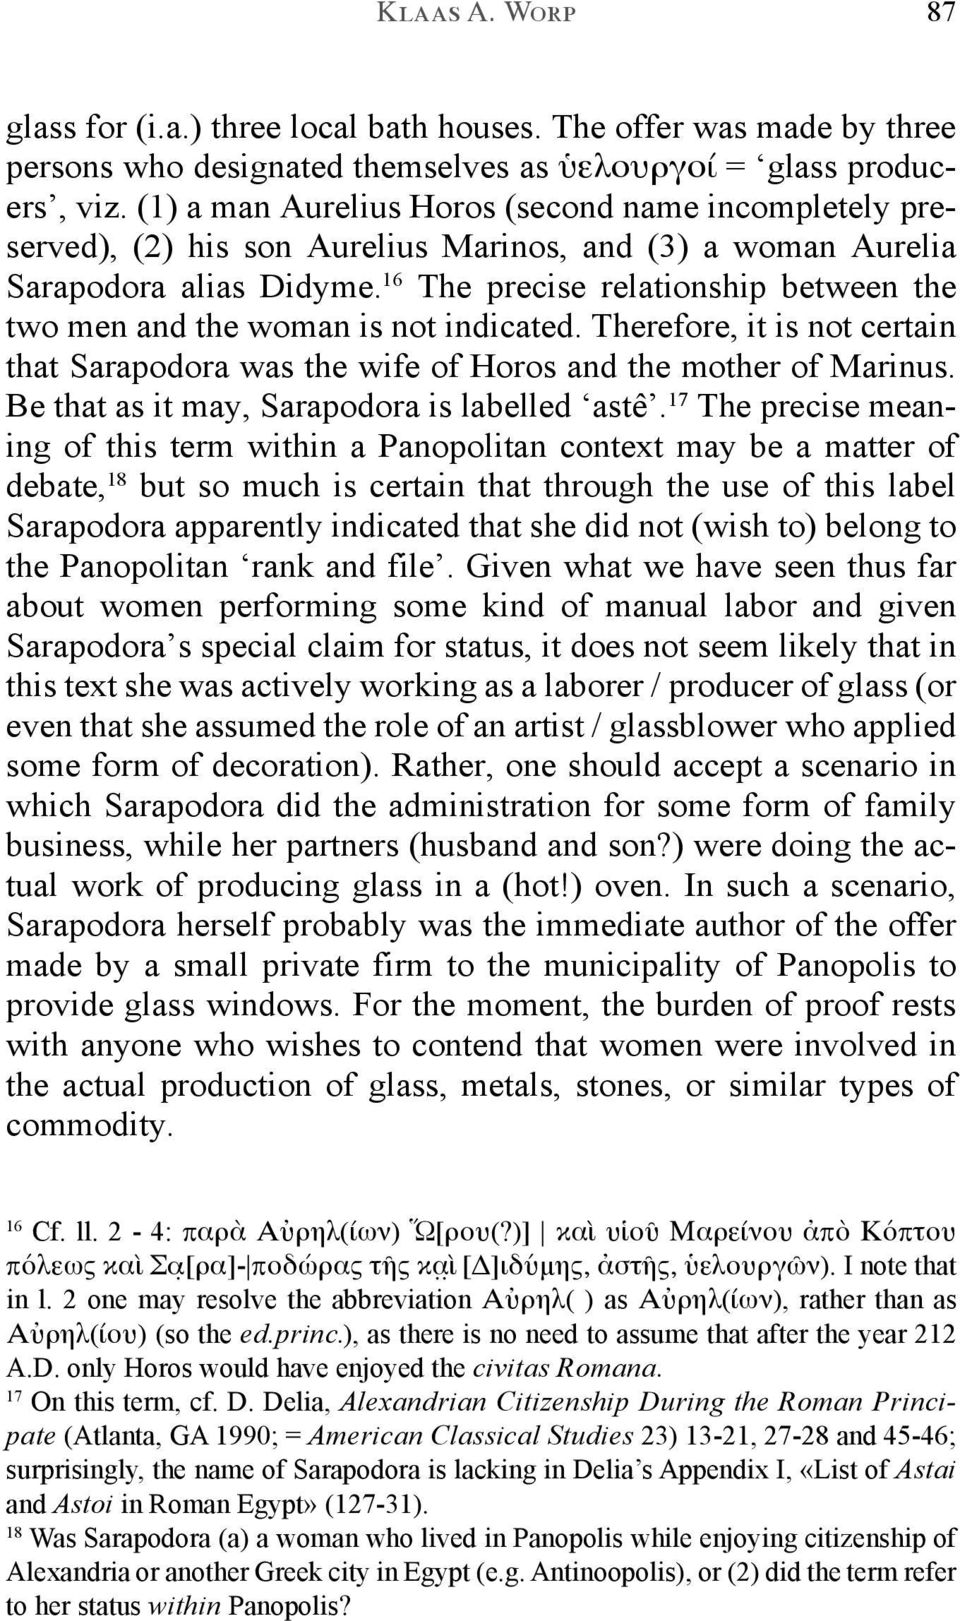 16 The precise relationship between the two men and the woman is not indicated. Therefore, it is not certain that Sarapodora was the wife of Horos and the mother of Marinus.